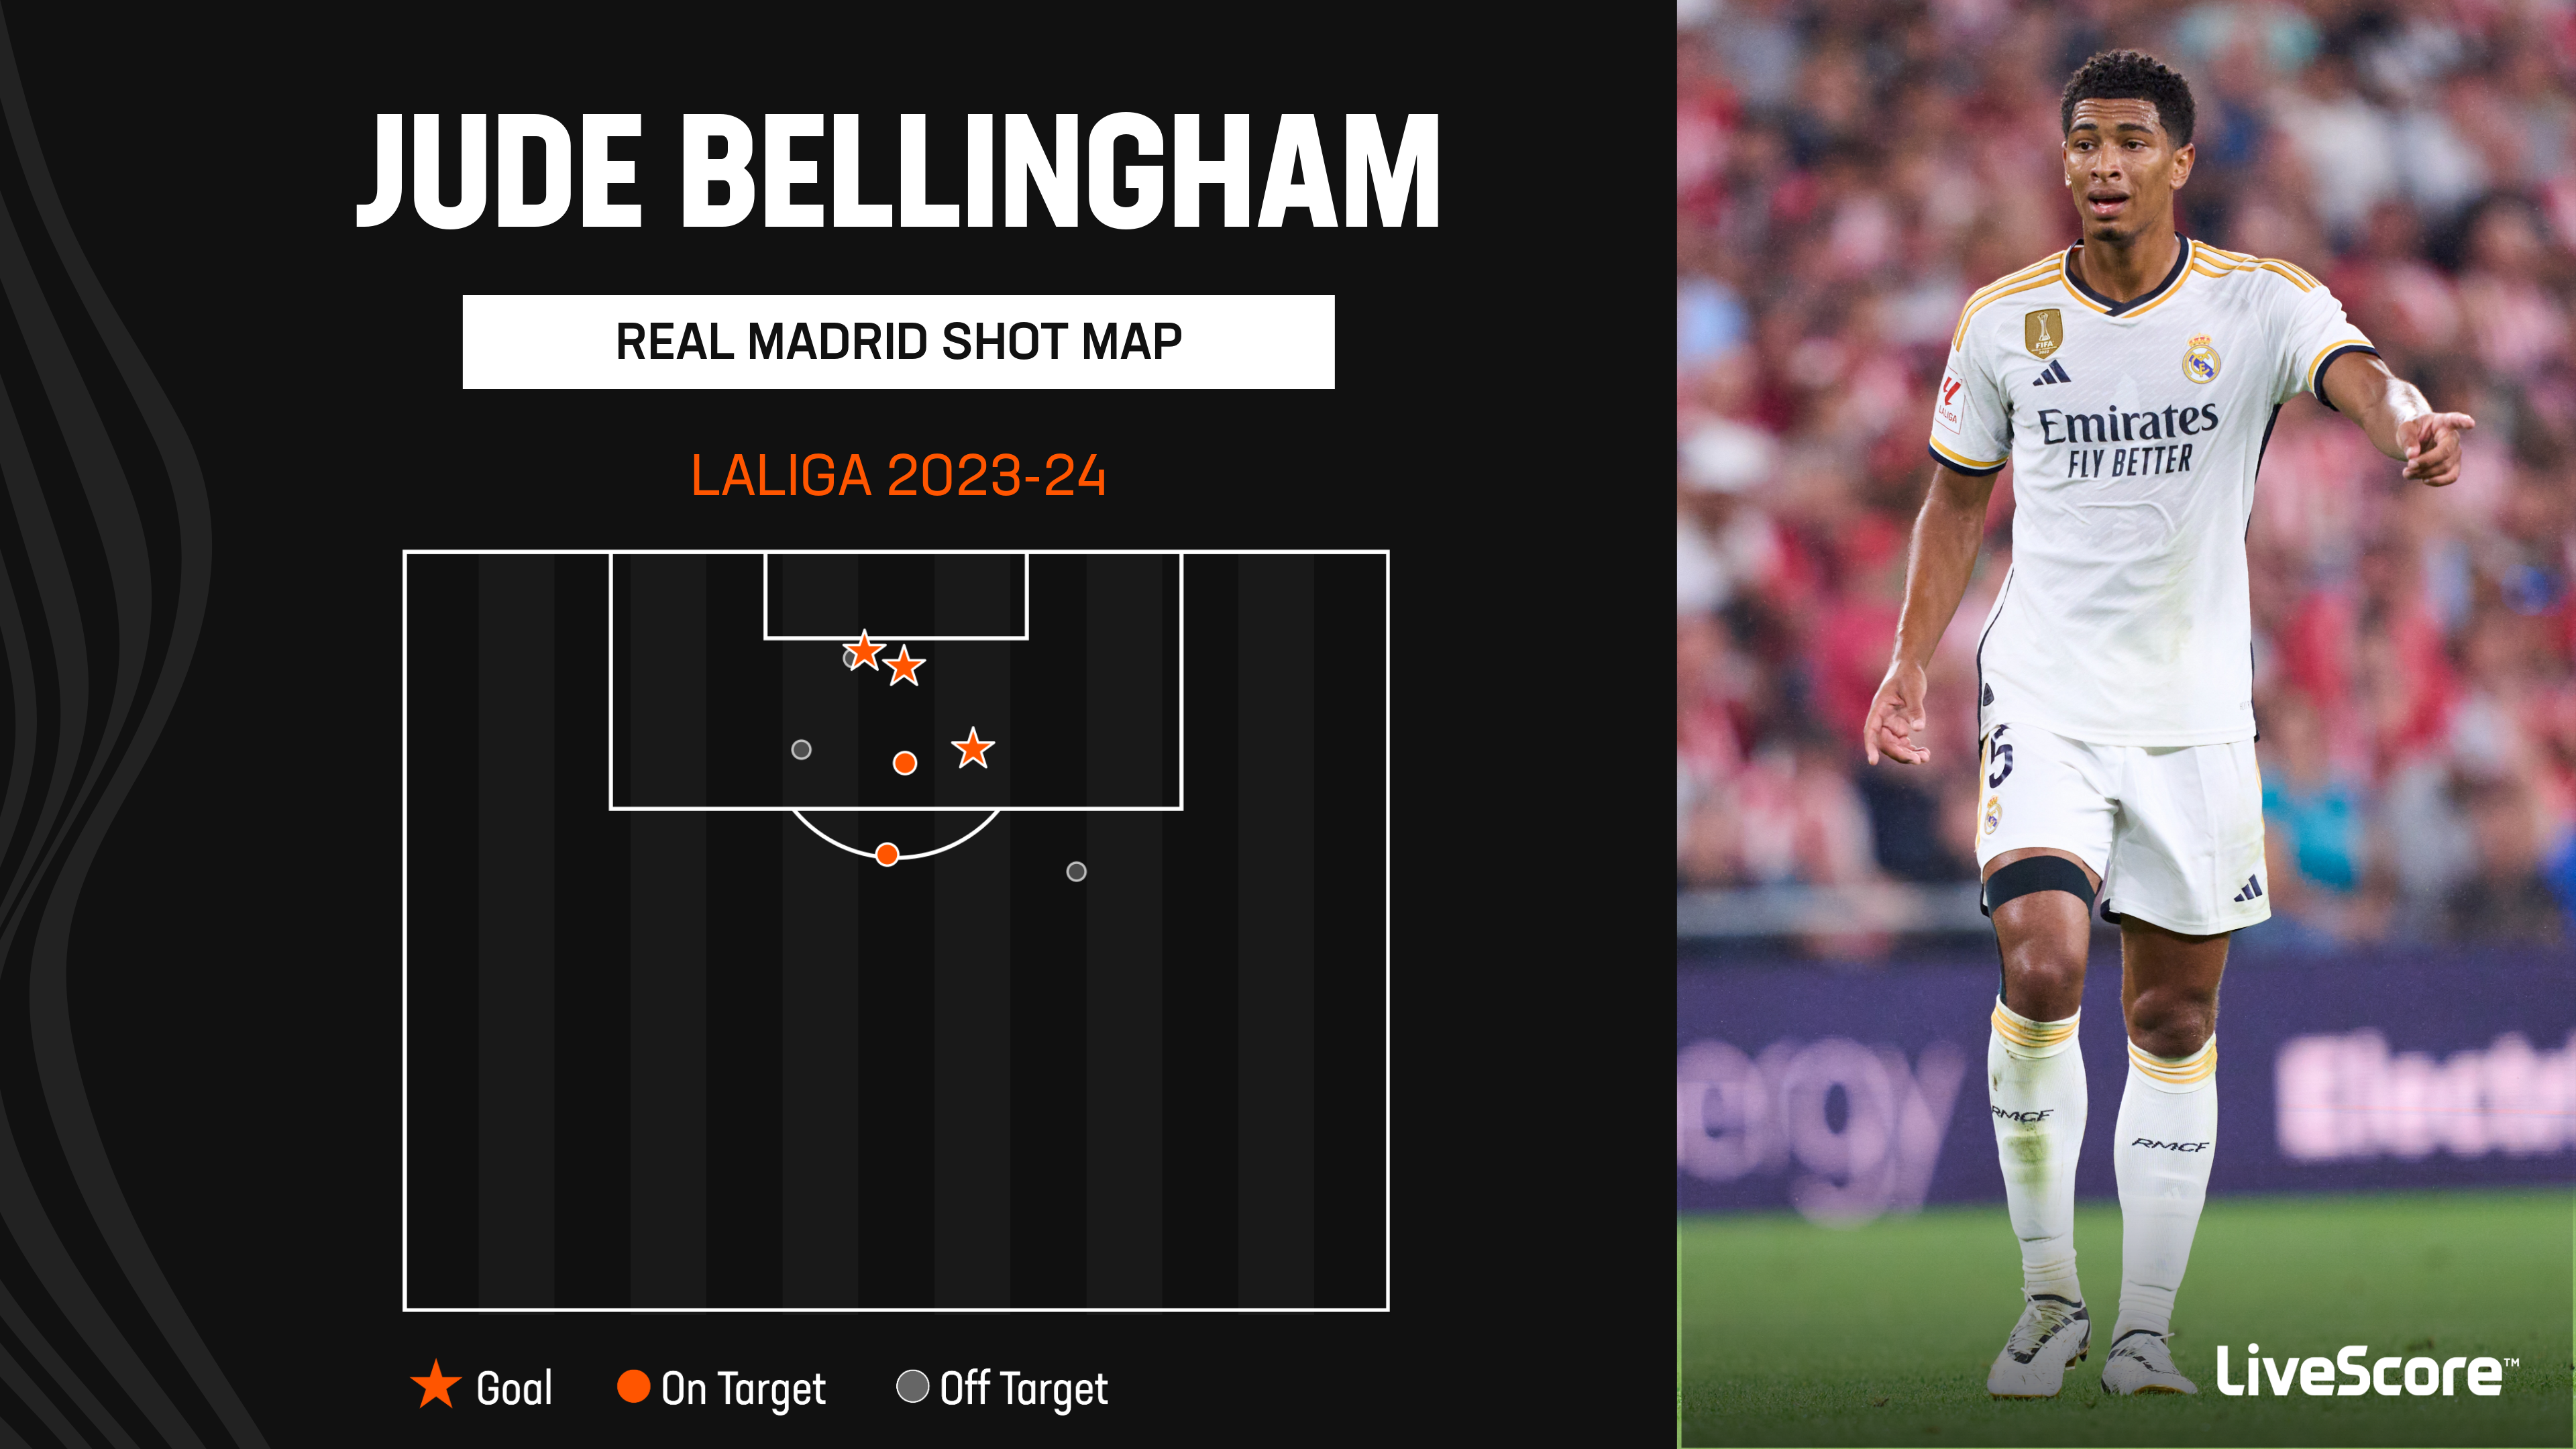 Real Madrid's Jude Bellingham conundrum as perfect LALIGA start